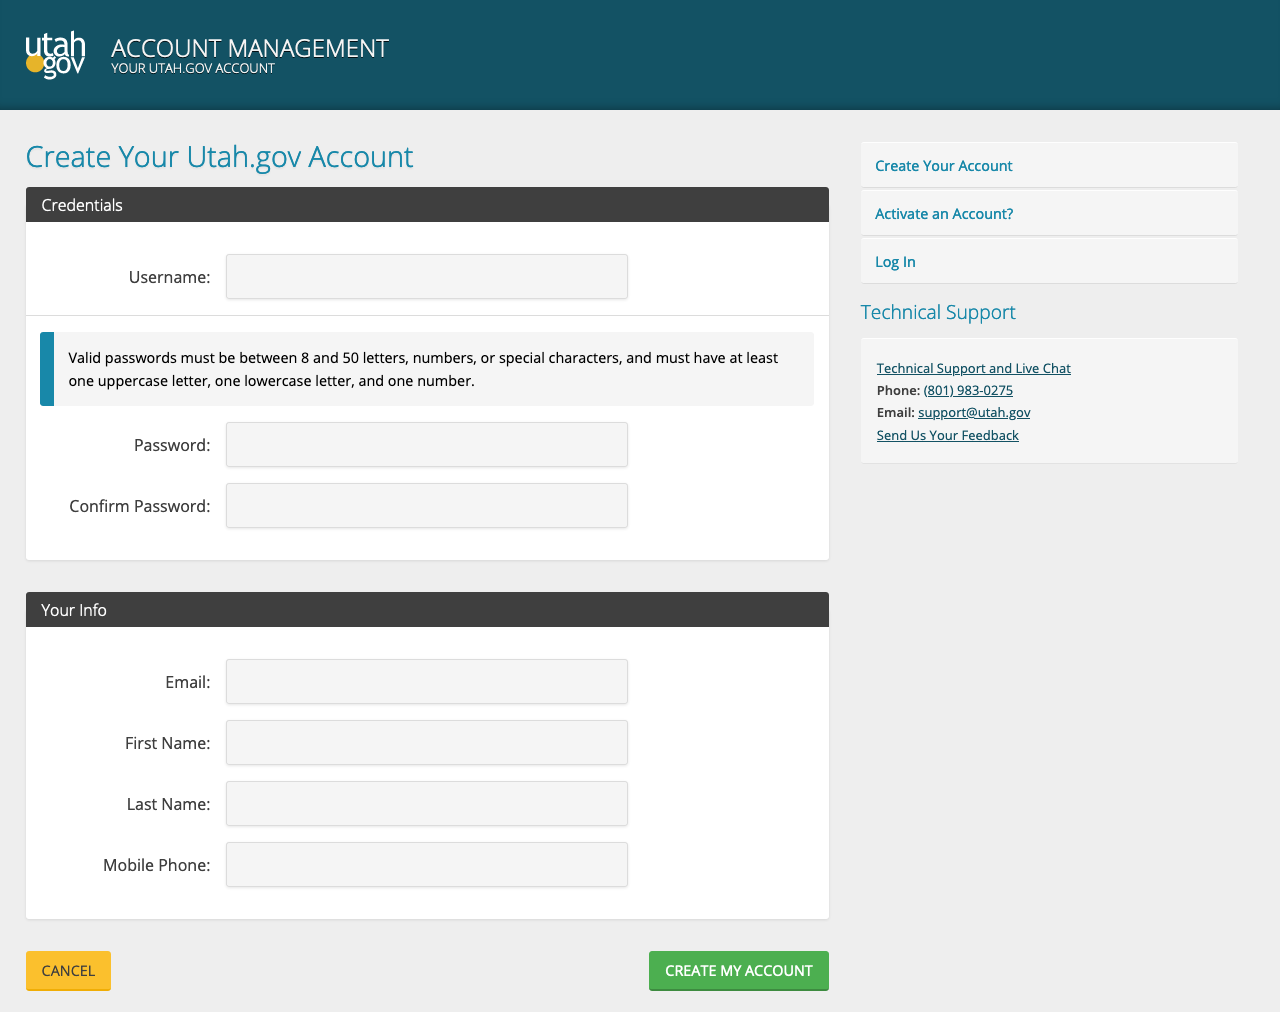 Creating a New Account